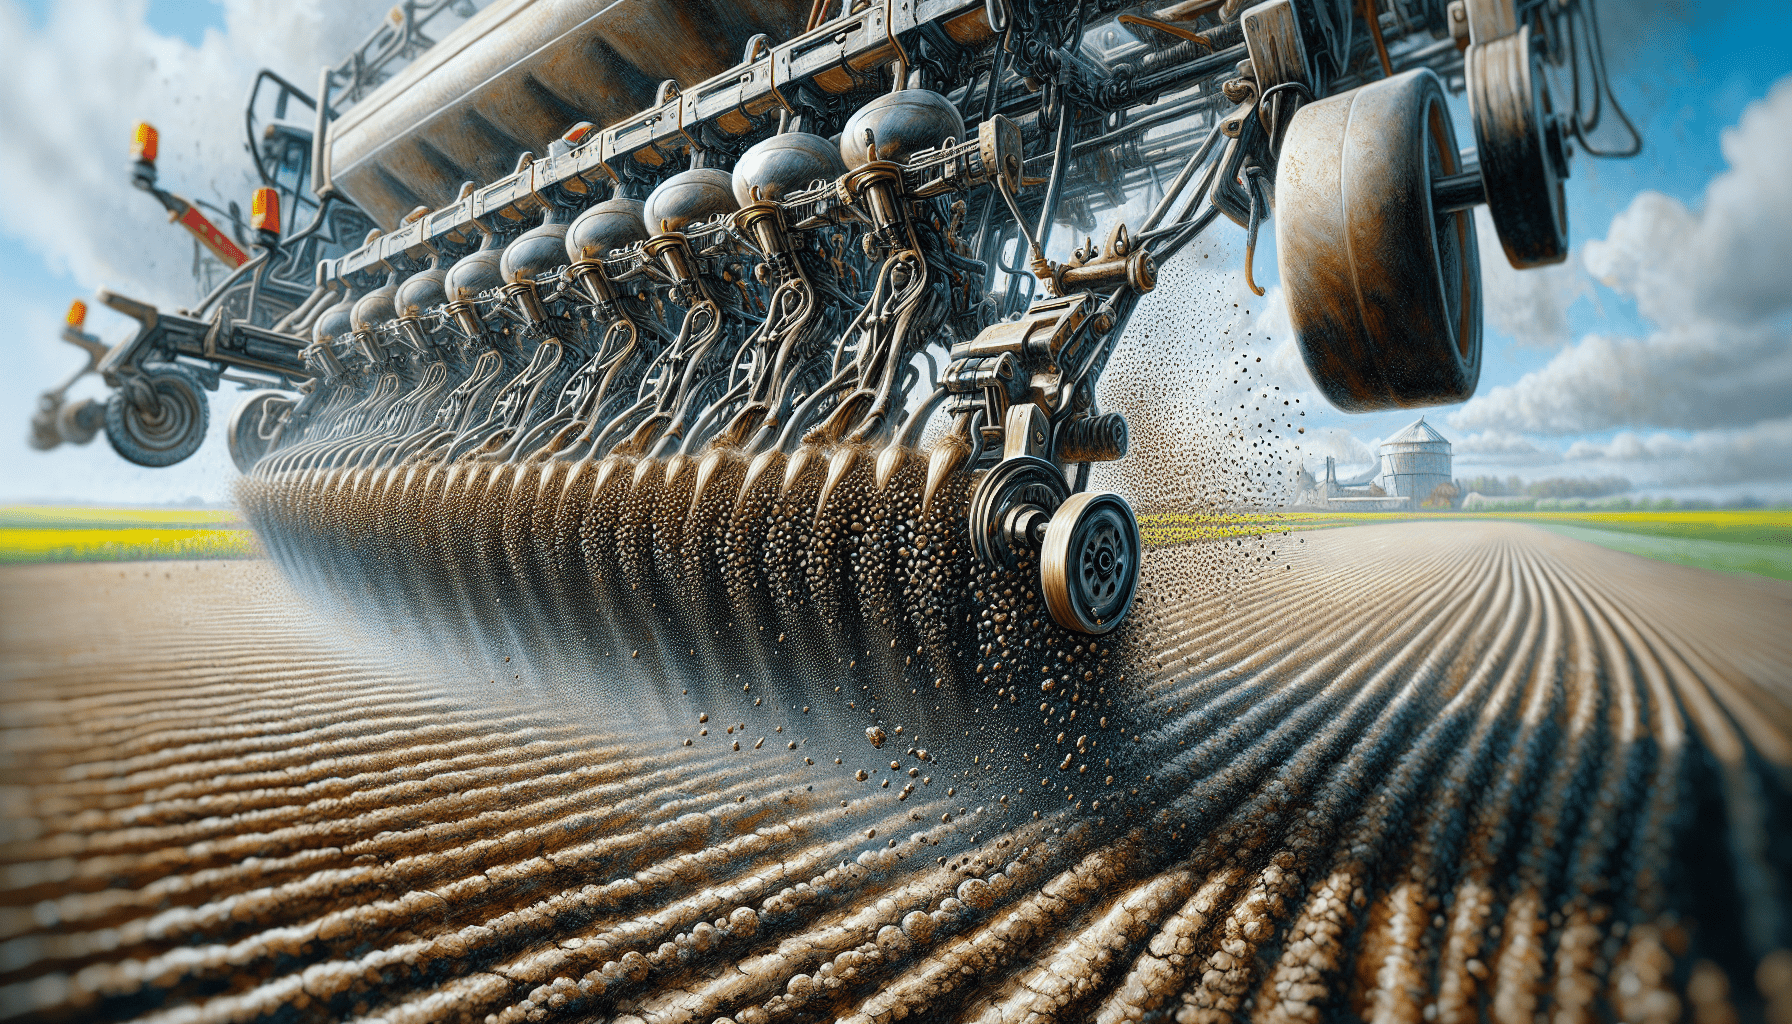 How To Properly Calibrate And Operate A Seed Drill For Accurate Planting